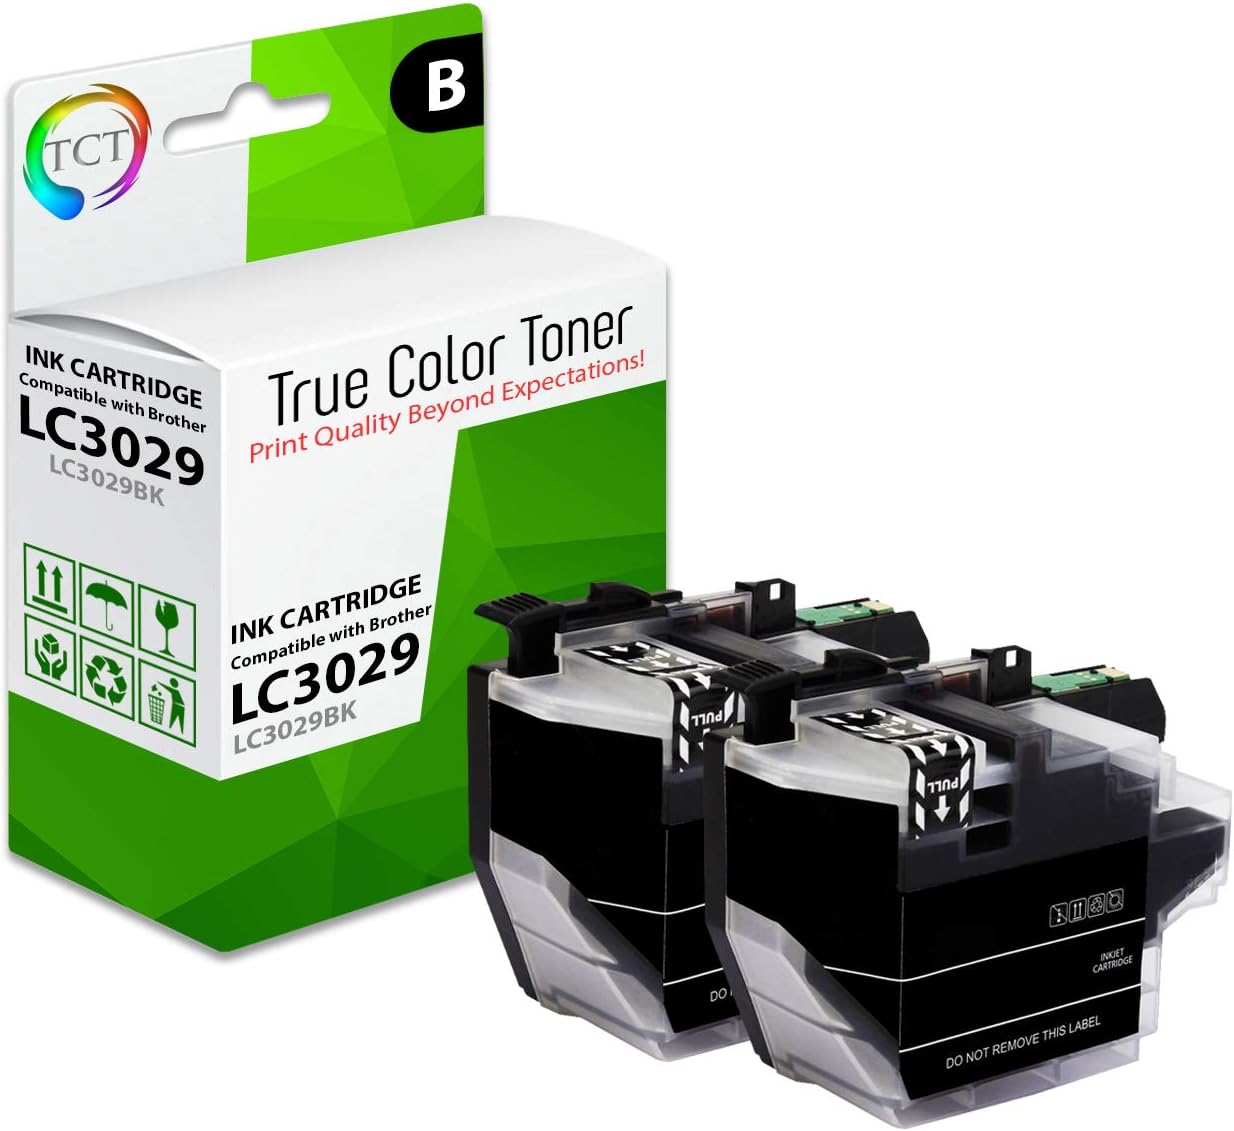 TCT Compatible Super HY Ink Cartridge Replacement for the Brother LC3029 Series - 2 Pack Black